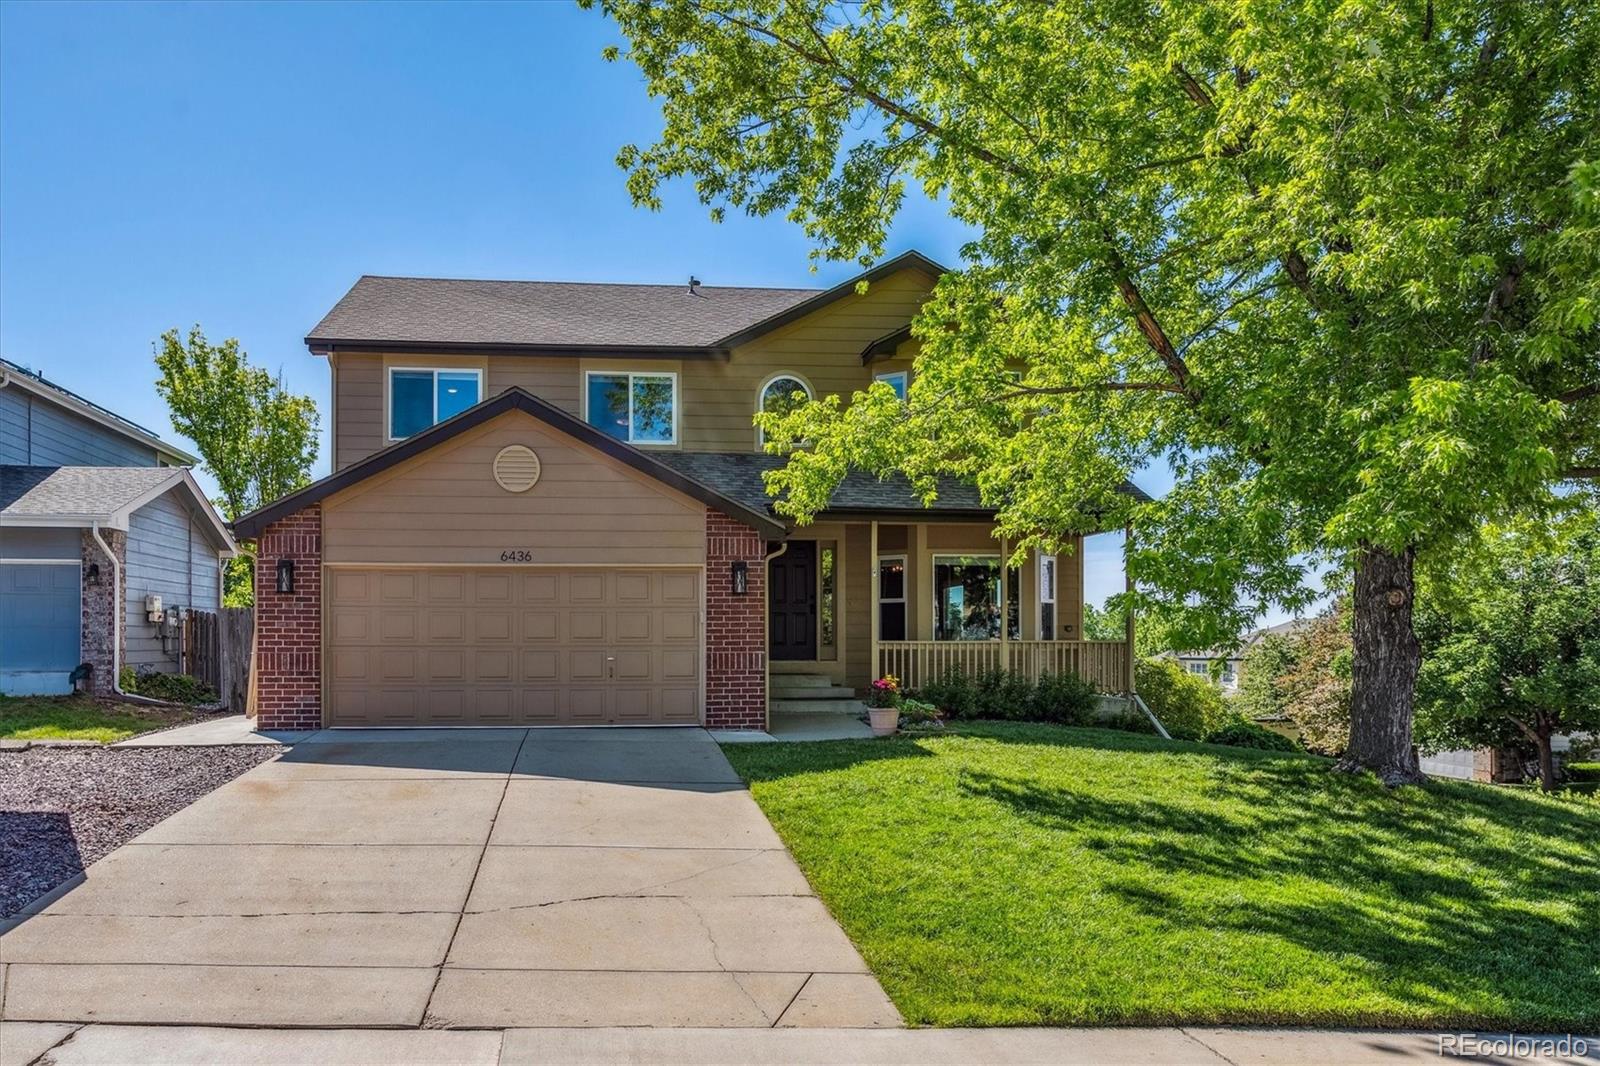 6436 s urban court, Littleton sold home. Closed on 2024-07-25 for $770,000.